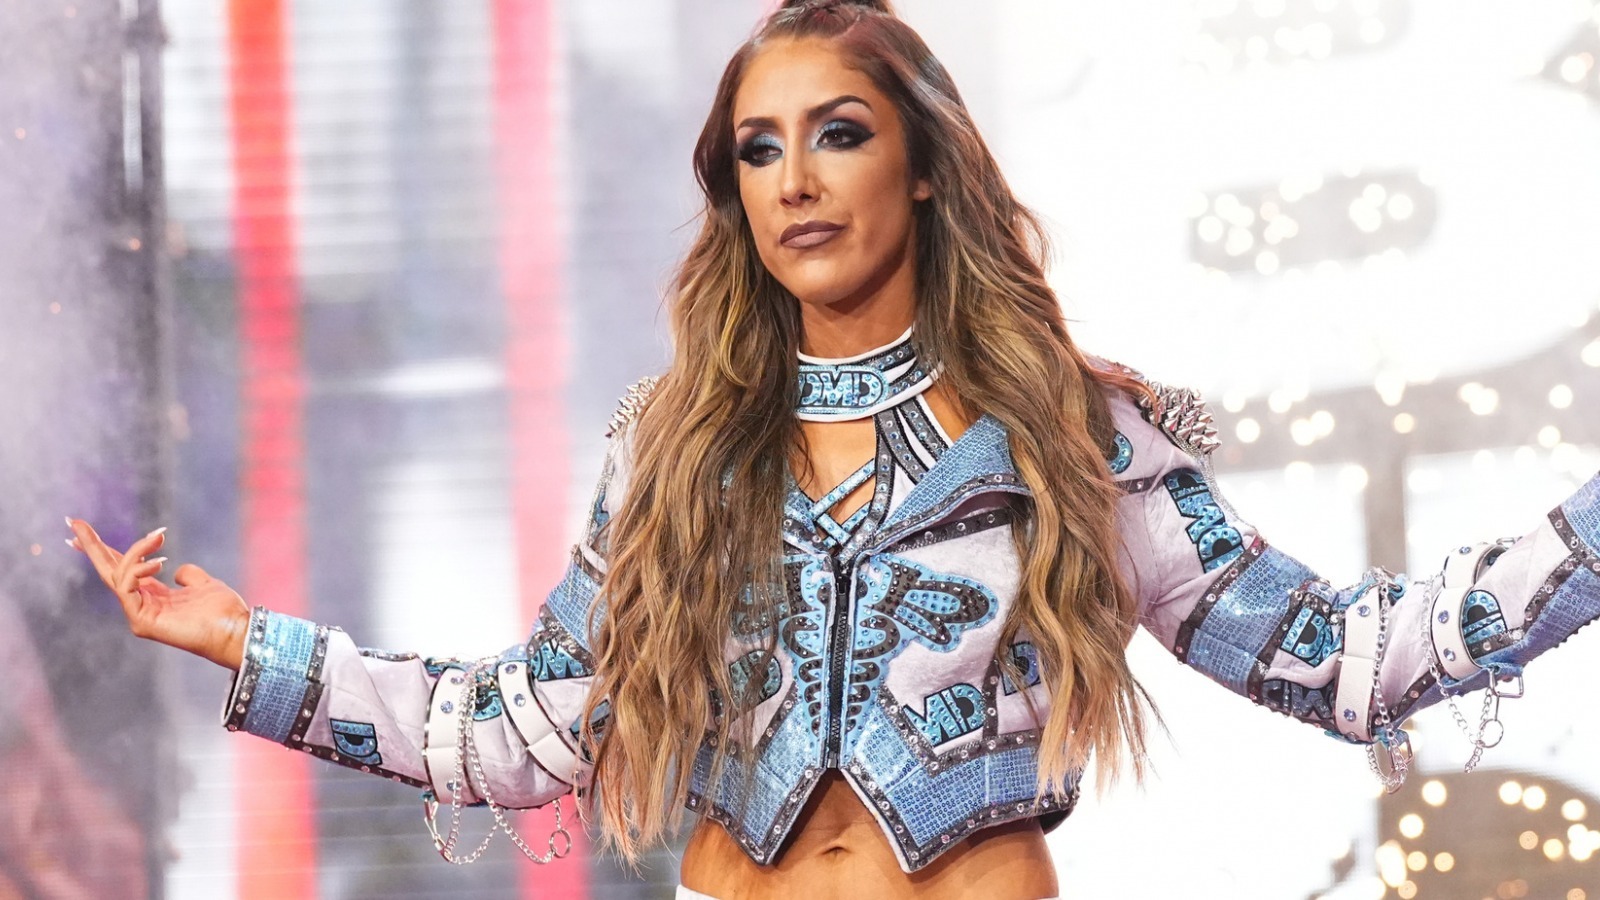 Dr. Britt Baker Not Involved With Keeping LuFisto Out Of AEW, Per Sources